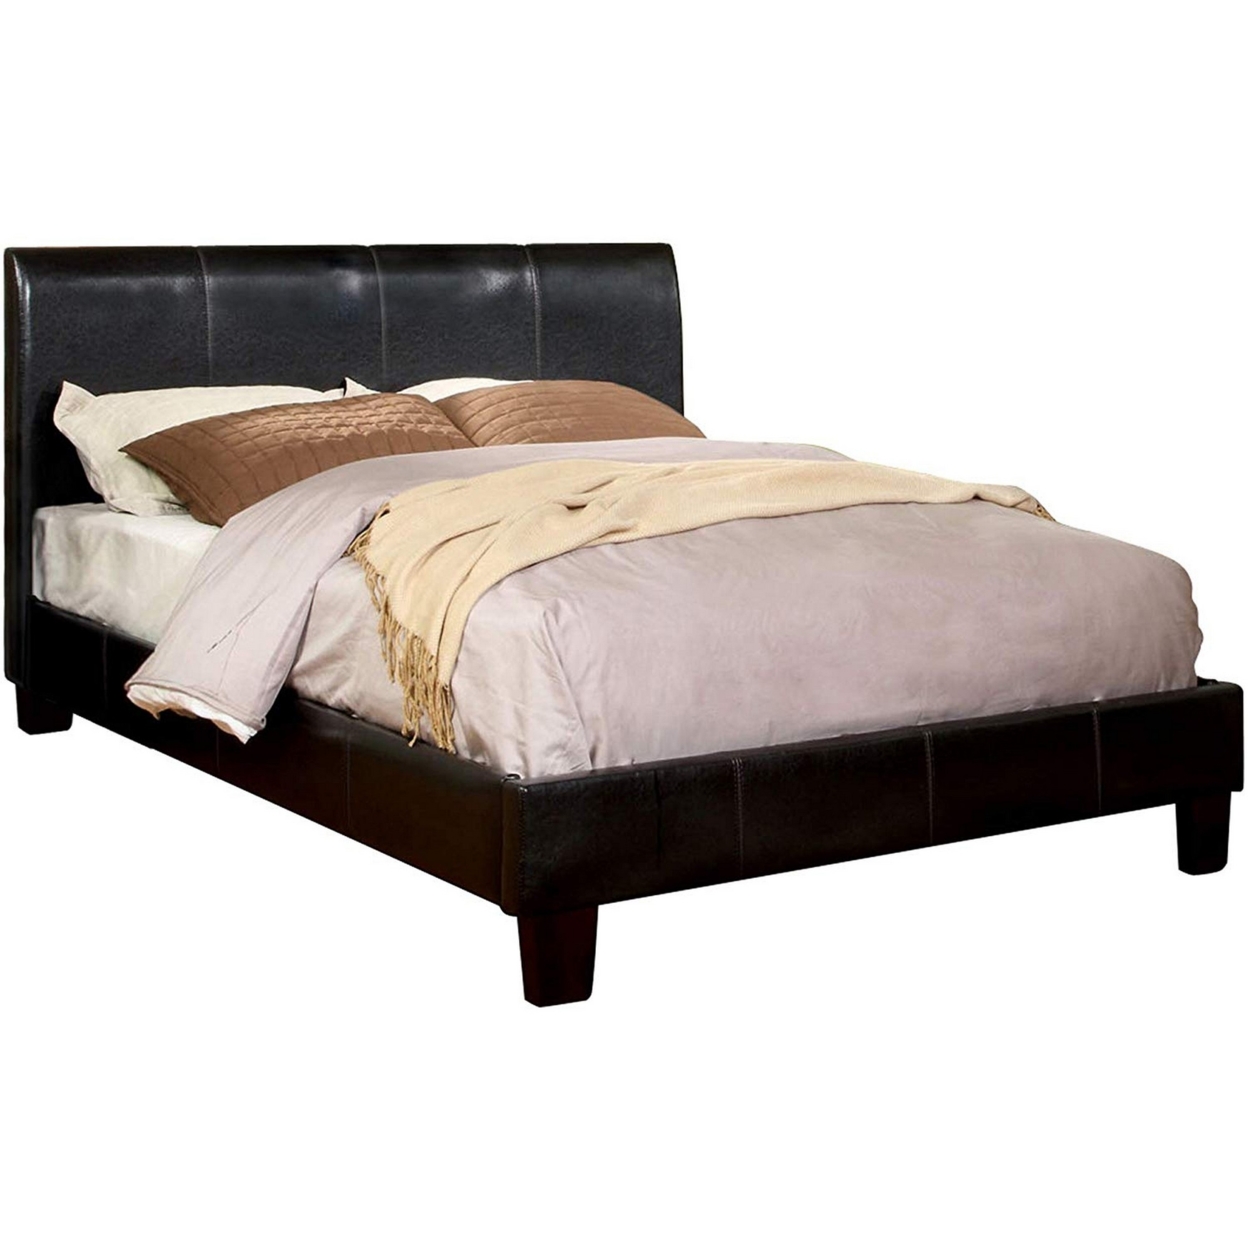 Platform Style Leatherette Queen Size Bed With Curved Headboard, Brown- Saltoro Sherpi